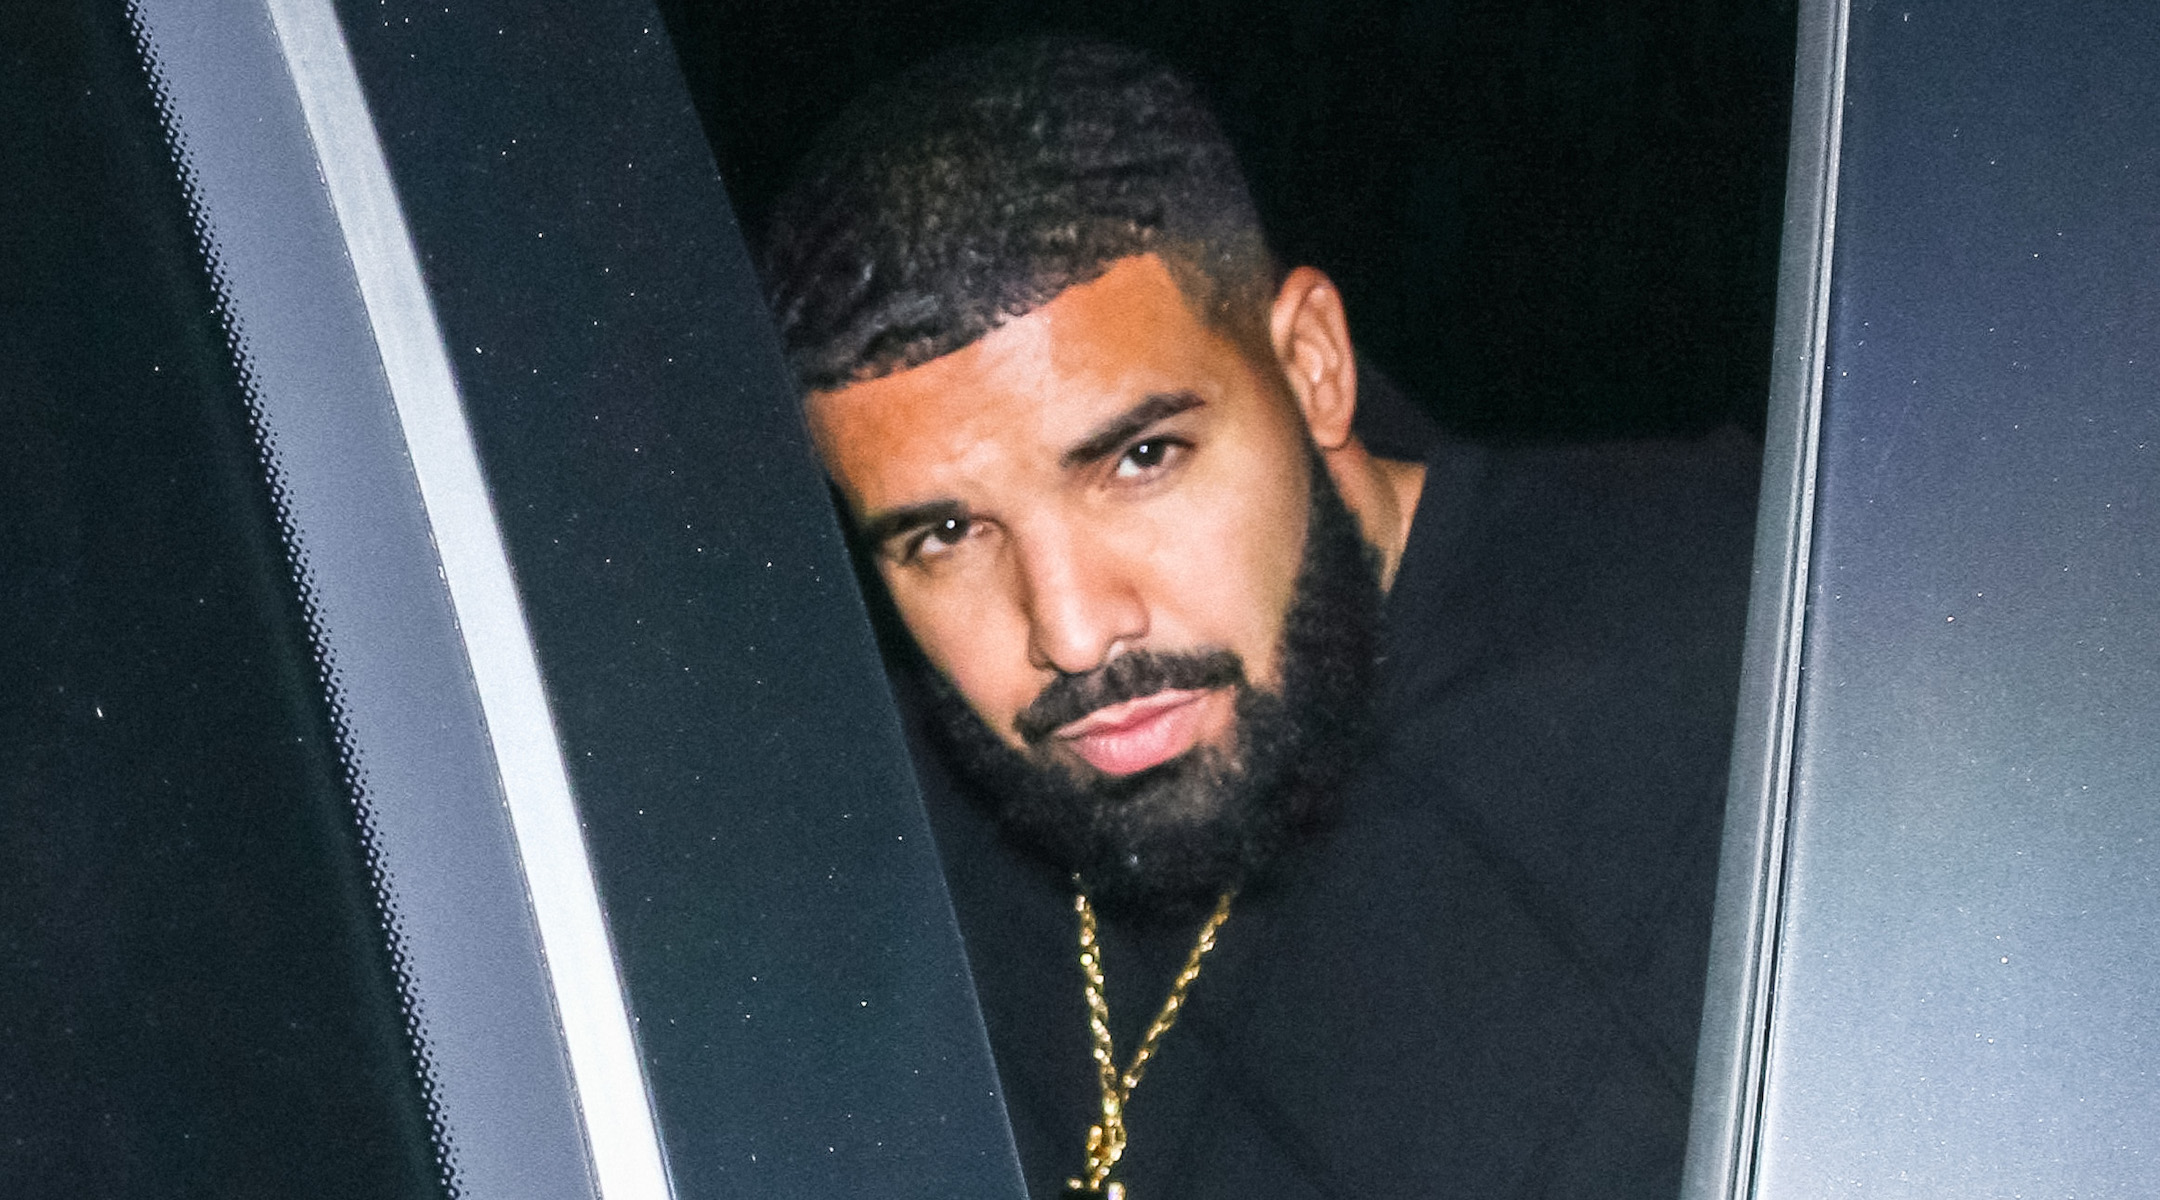 Drake seen in Los Angeles, Sept. 21, 2019. (BG027/Bauer-Griffin/GC Images)